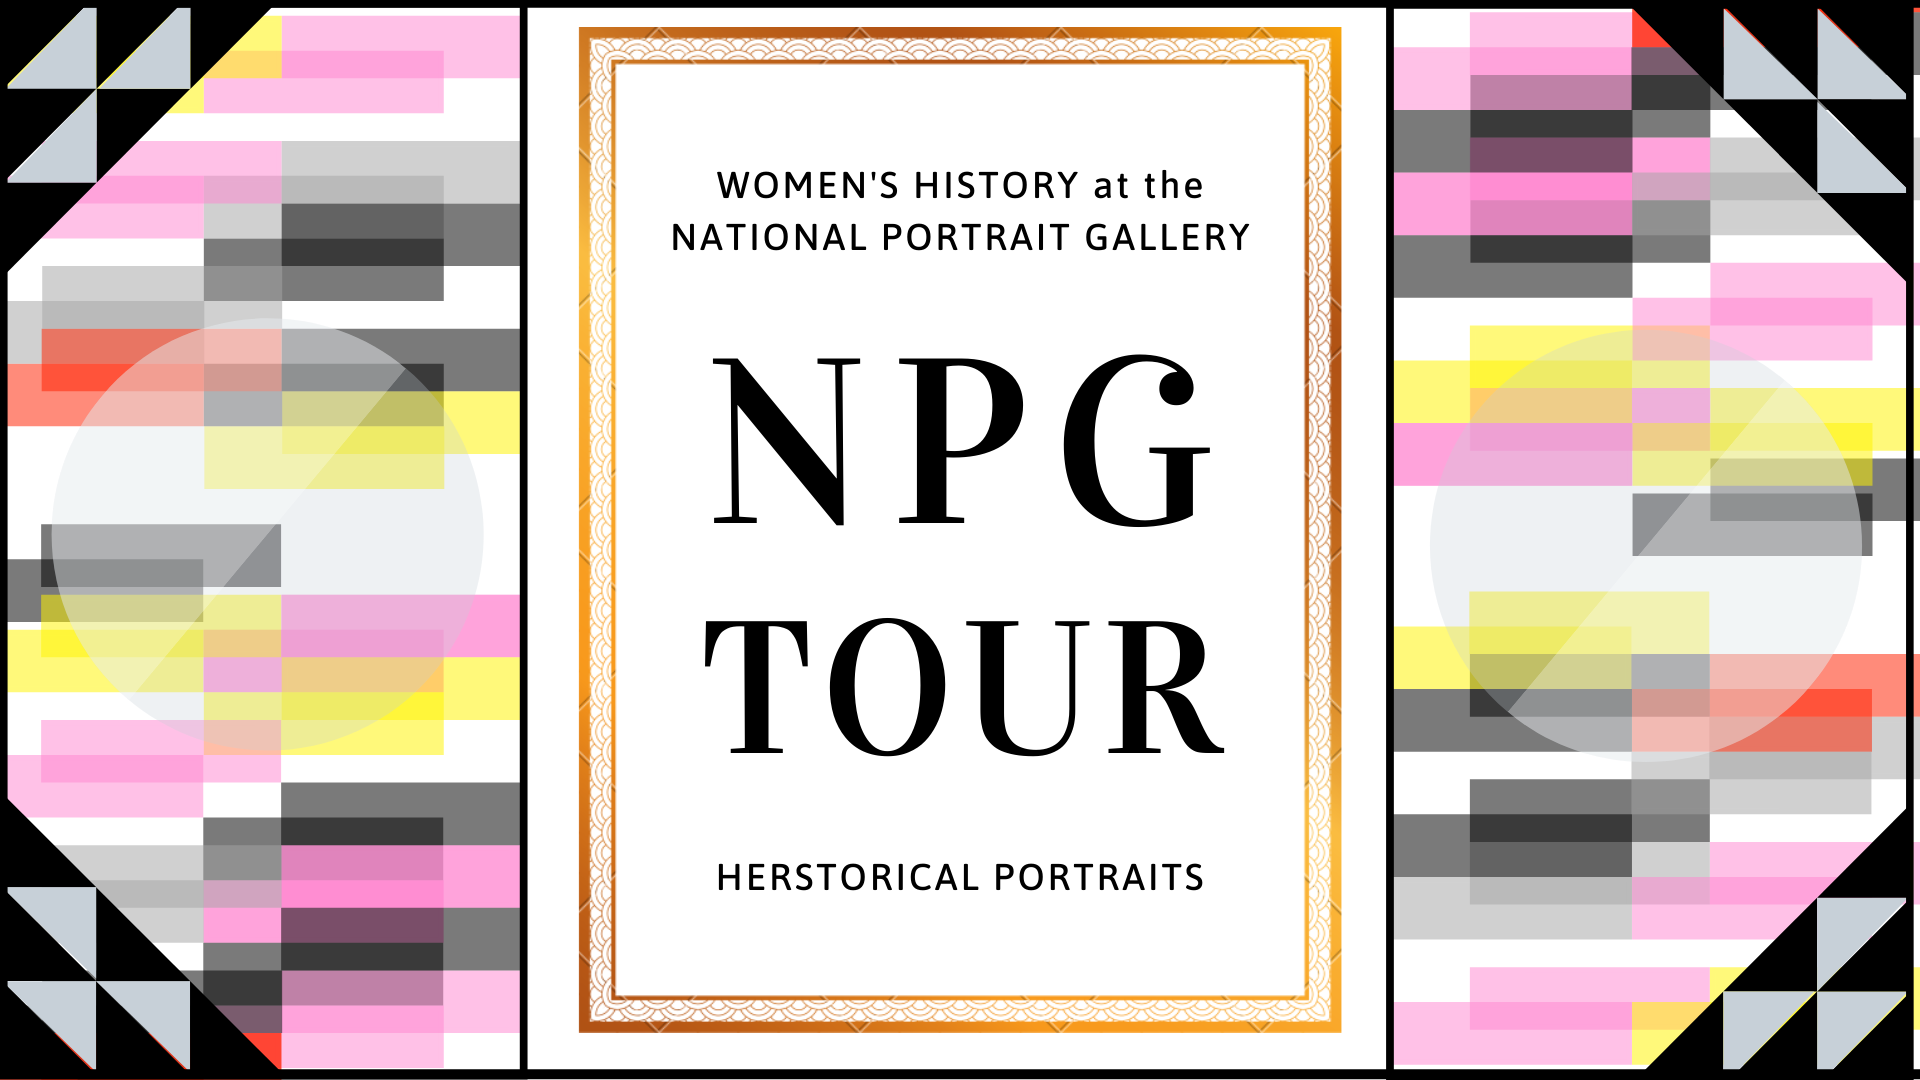 Tour: Herstorical Portraits